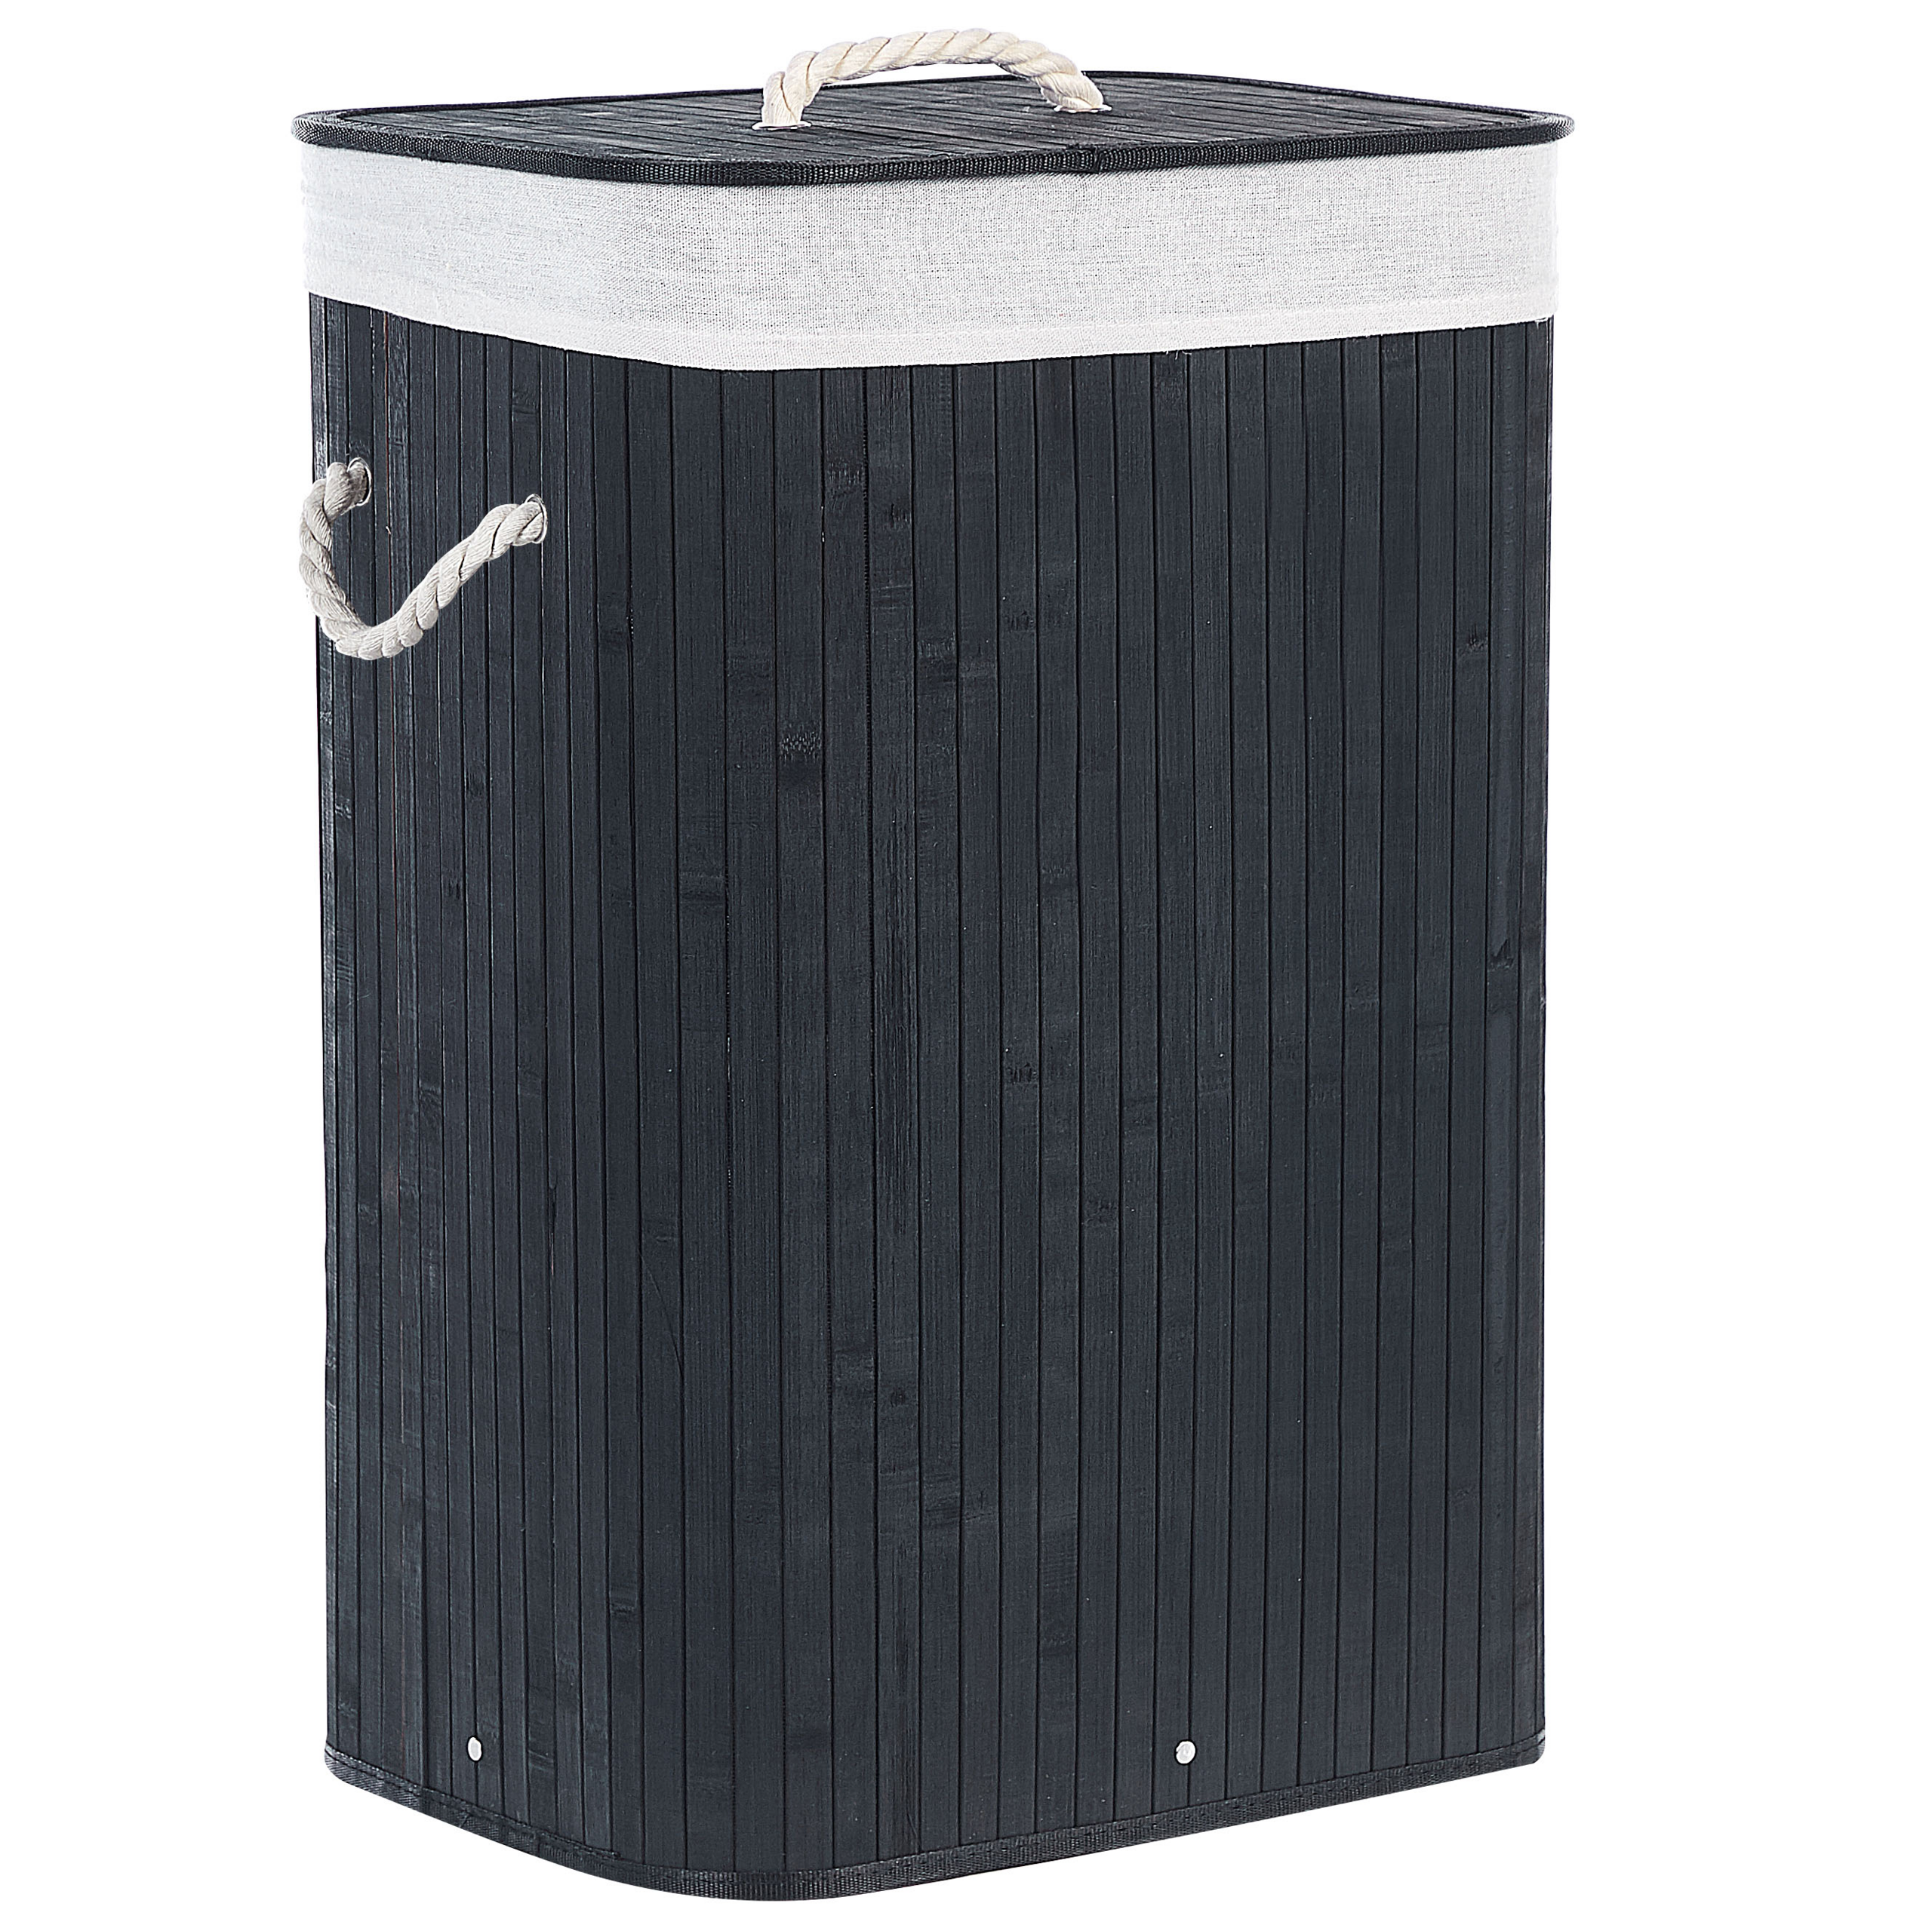 Beliani Storage Basket Black Bamboo with Lid Laundry Bin Boho Practical Accessories Material:Bamboo Wood Size:30x60x40